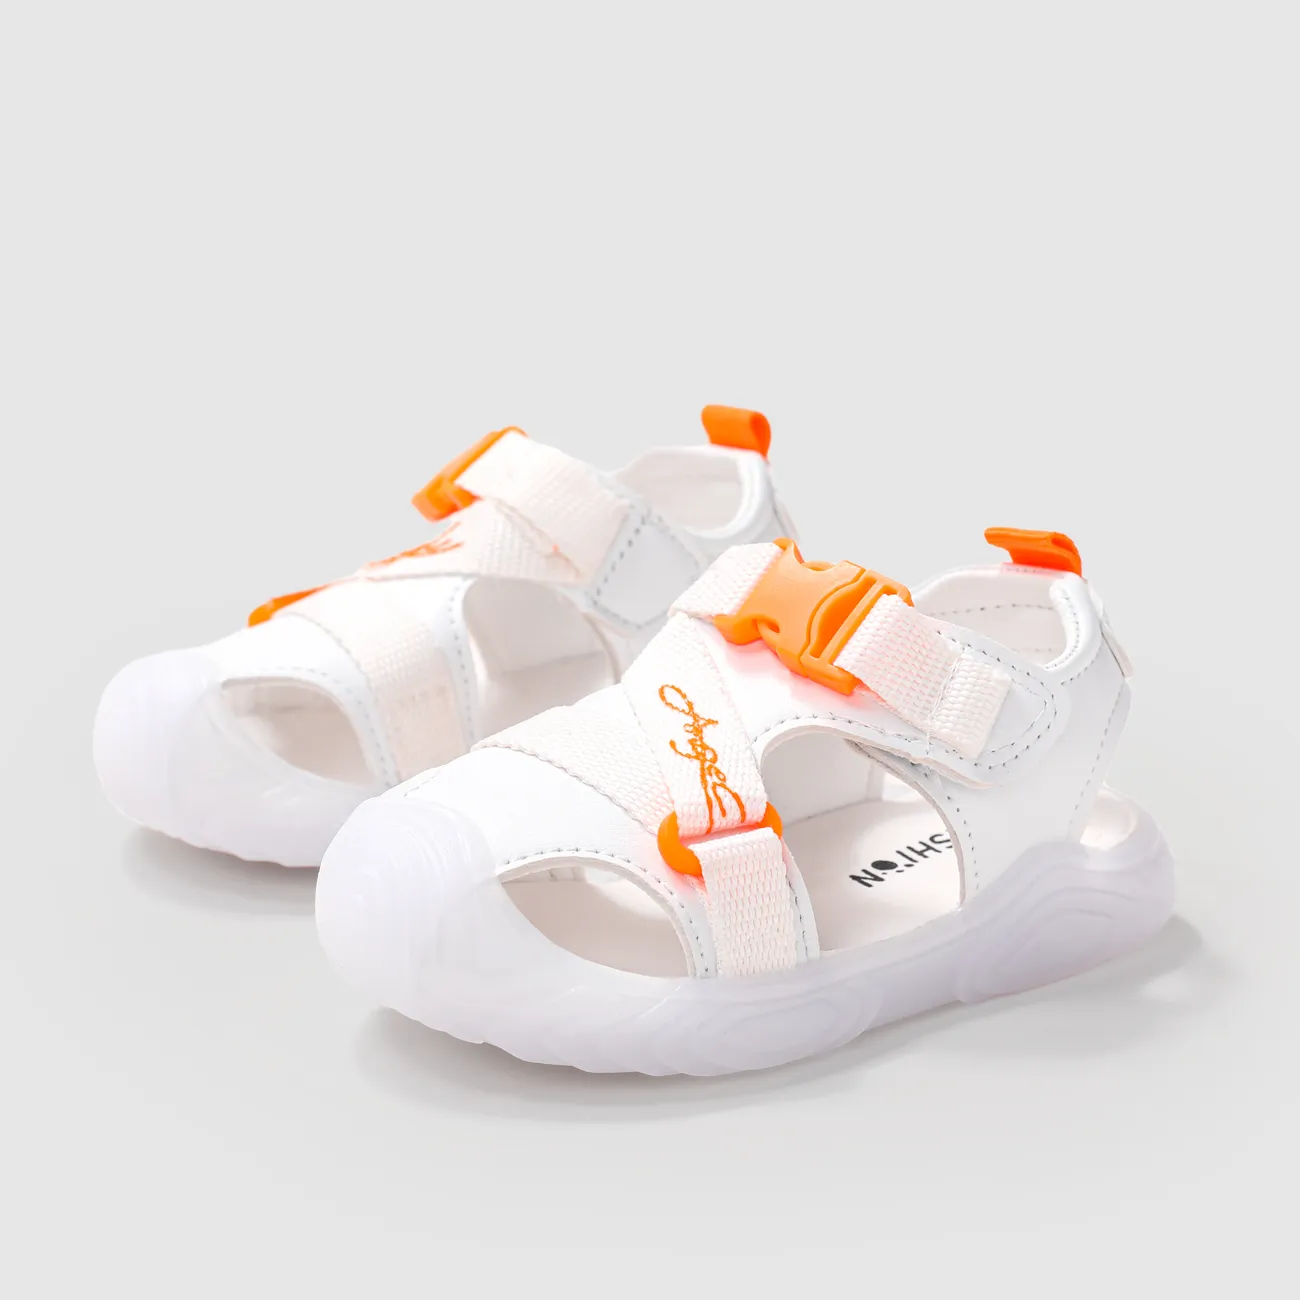 Unisex Toddler Sandals - Casual Solid Color Design for Children's Shoes White big image 1